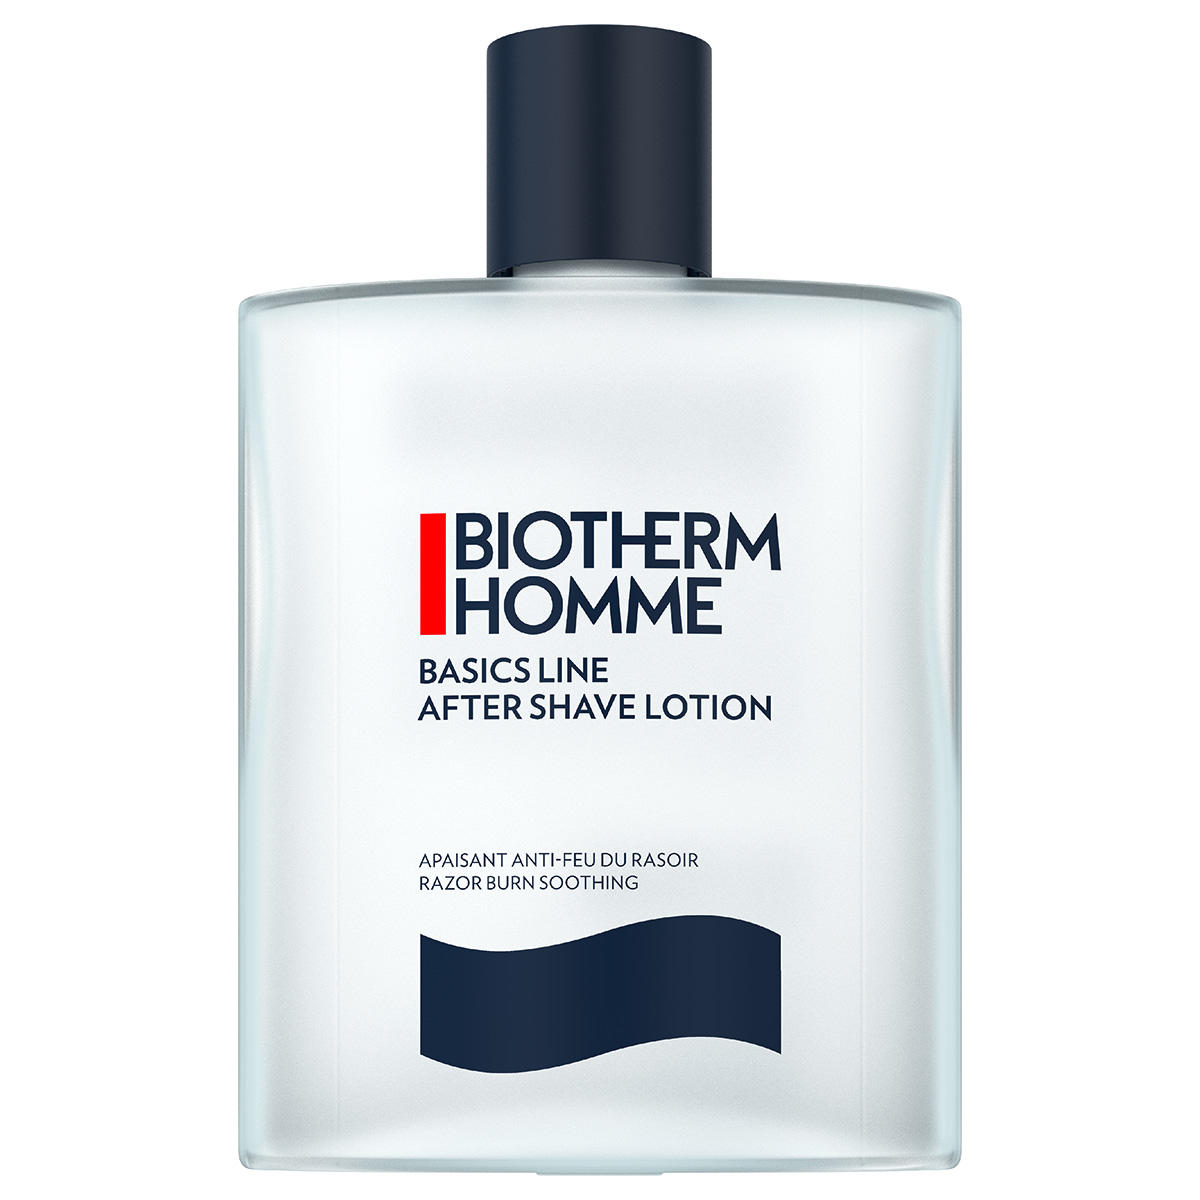 Biotherm Homme Basics Line After Shave Lotion 100 ml - 1